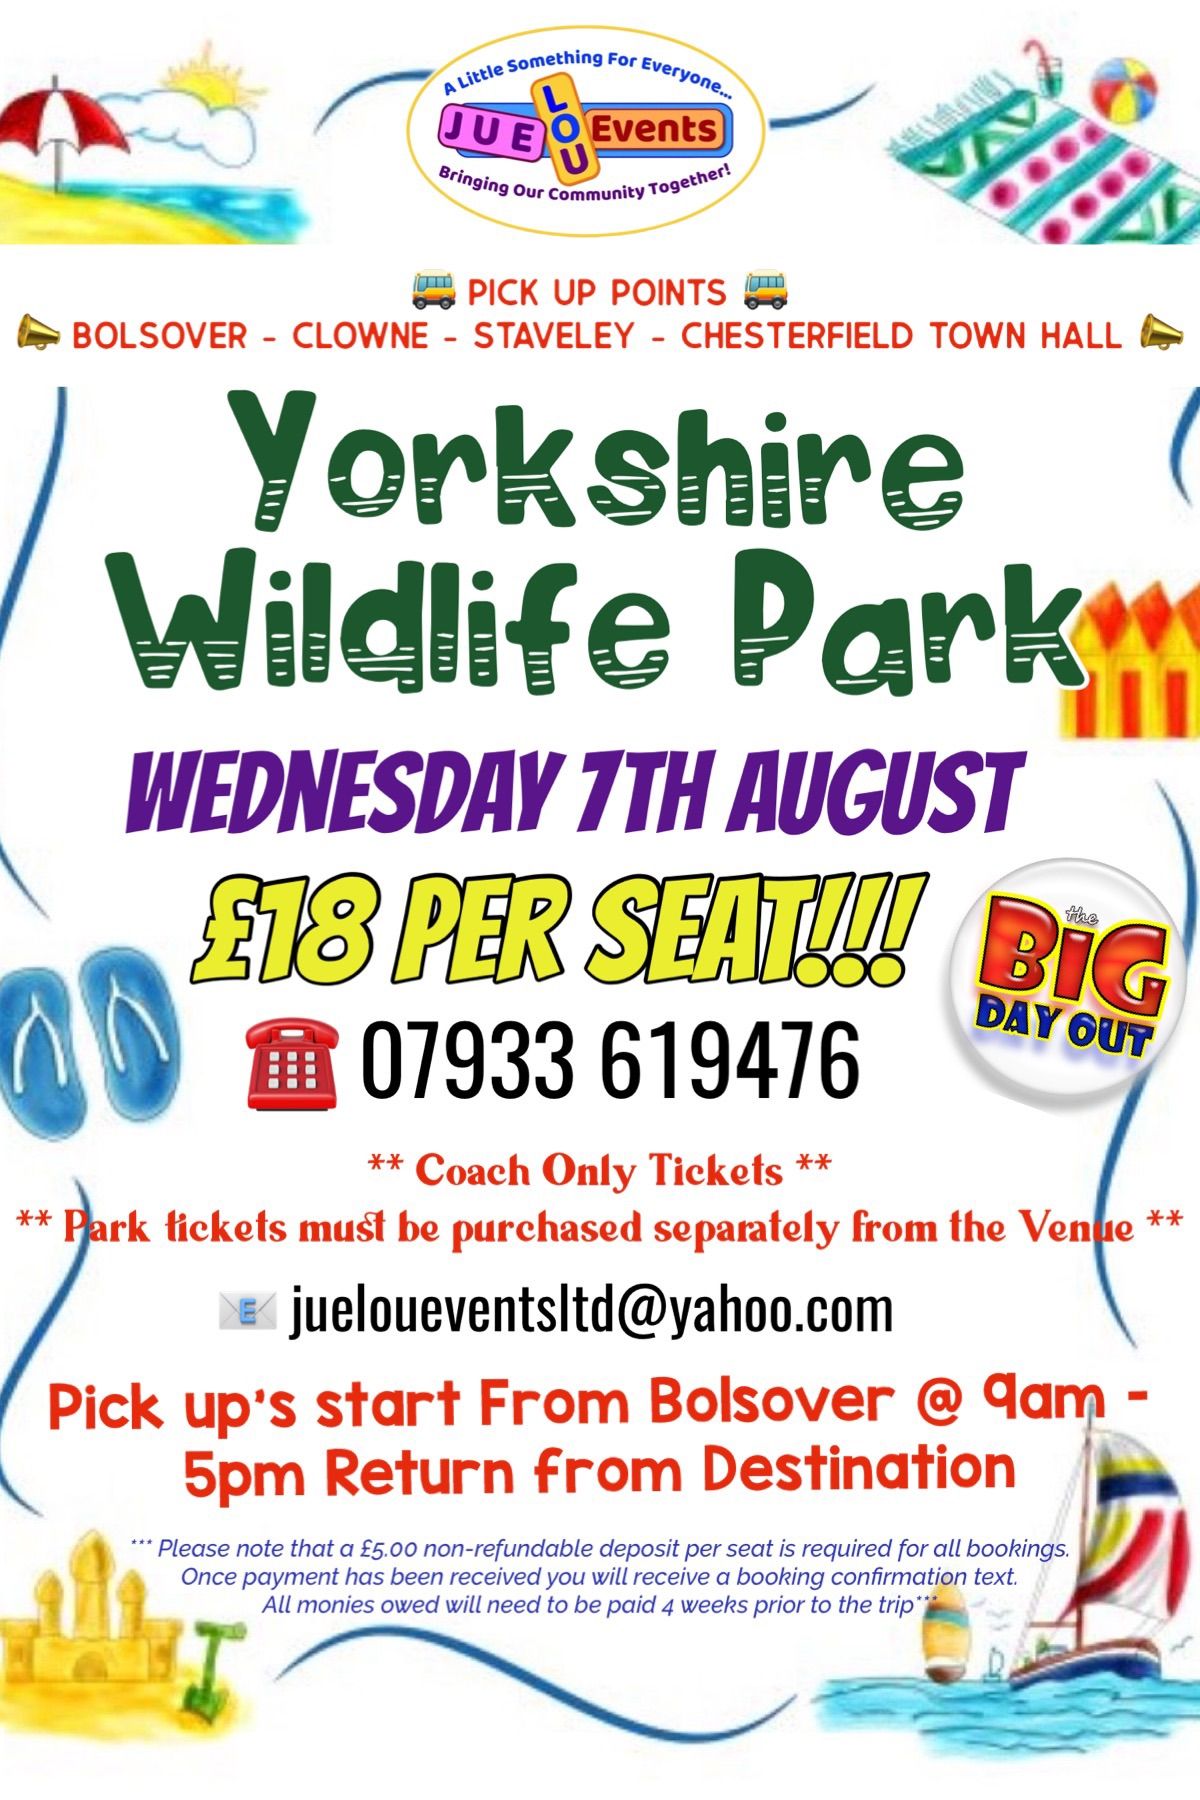 Yorkshire Wildlife Park - ** Coach Only Tickets **